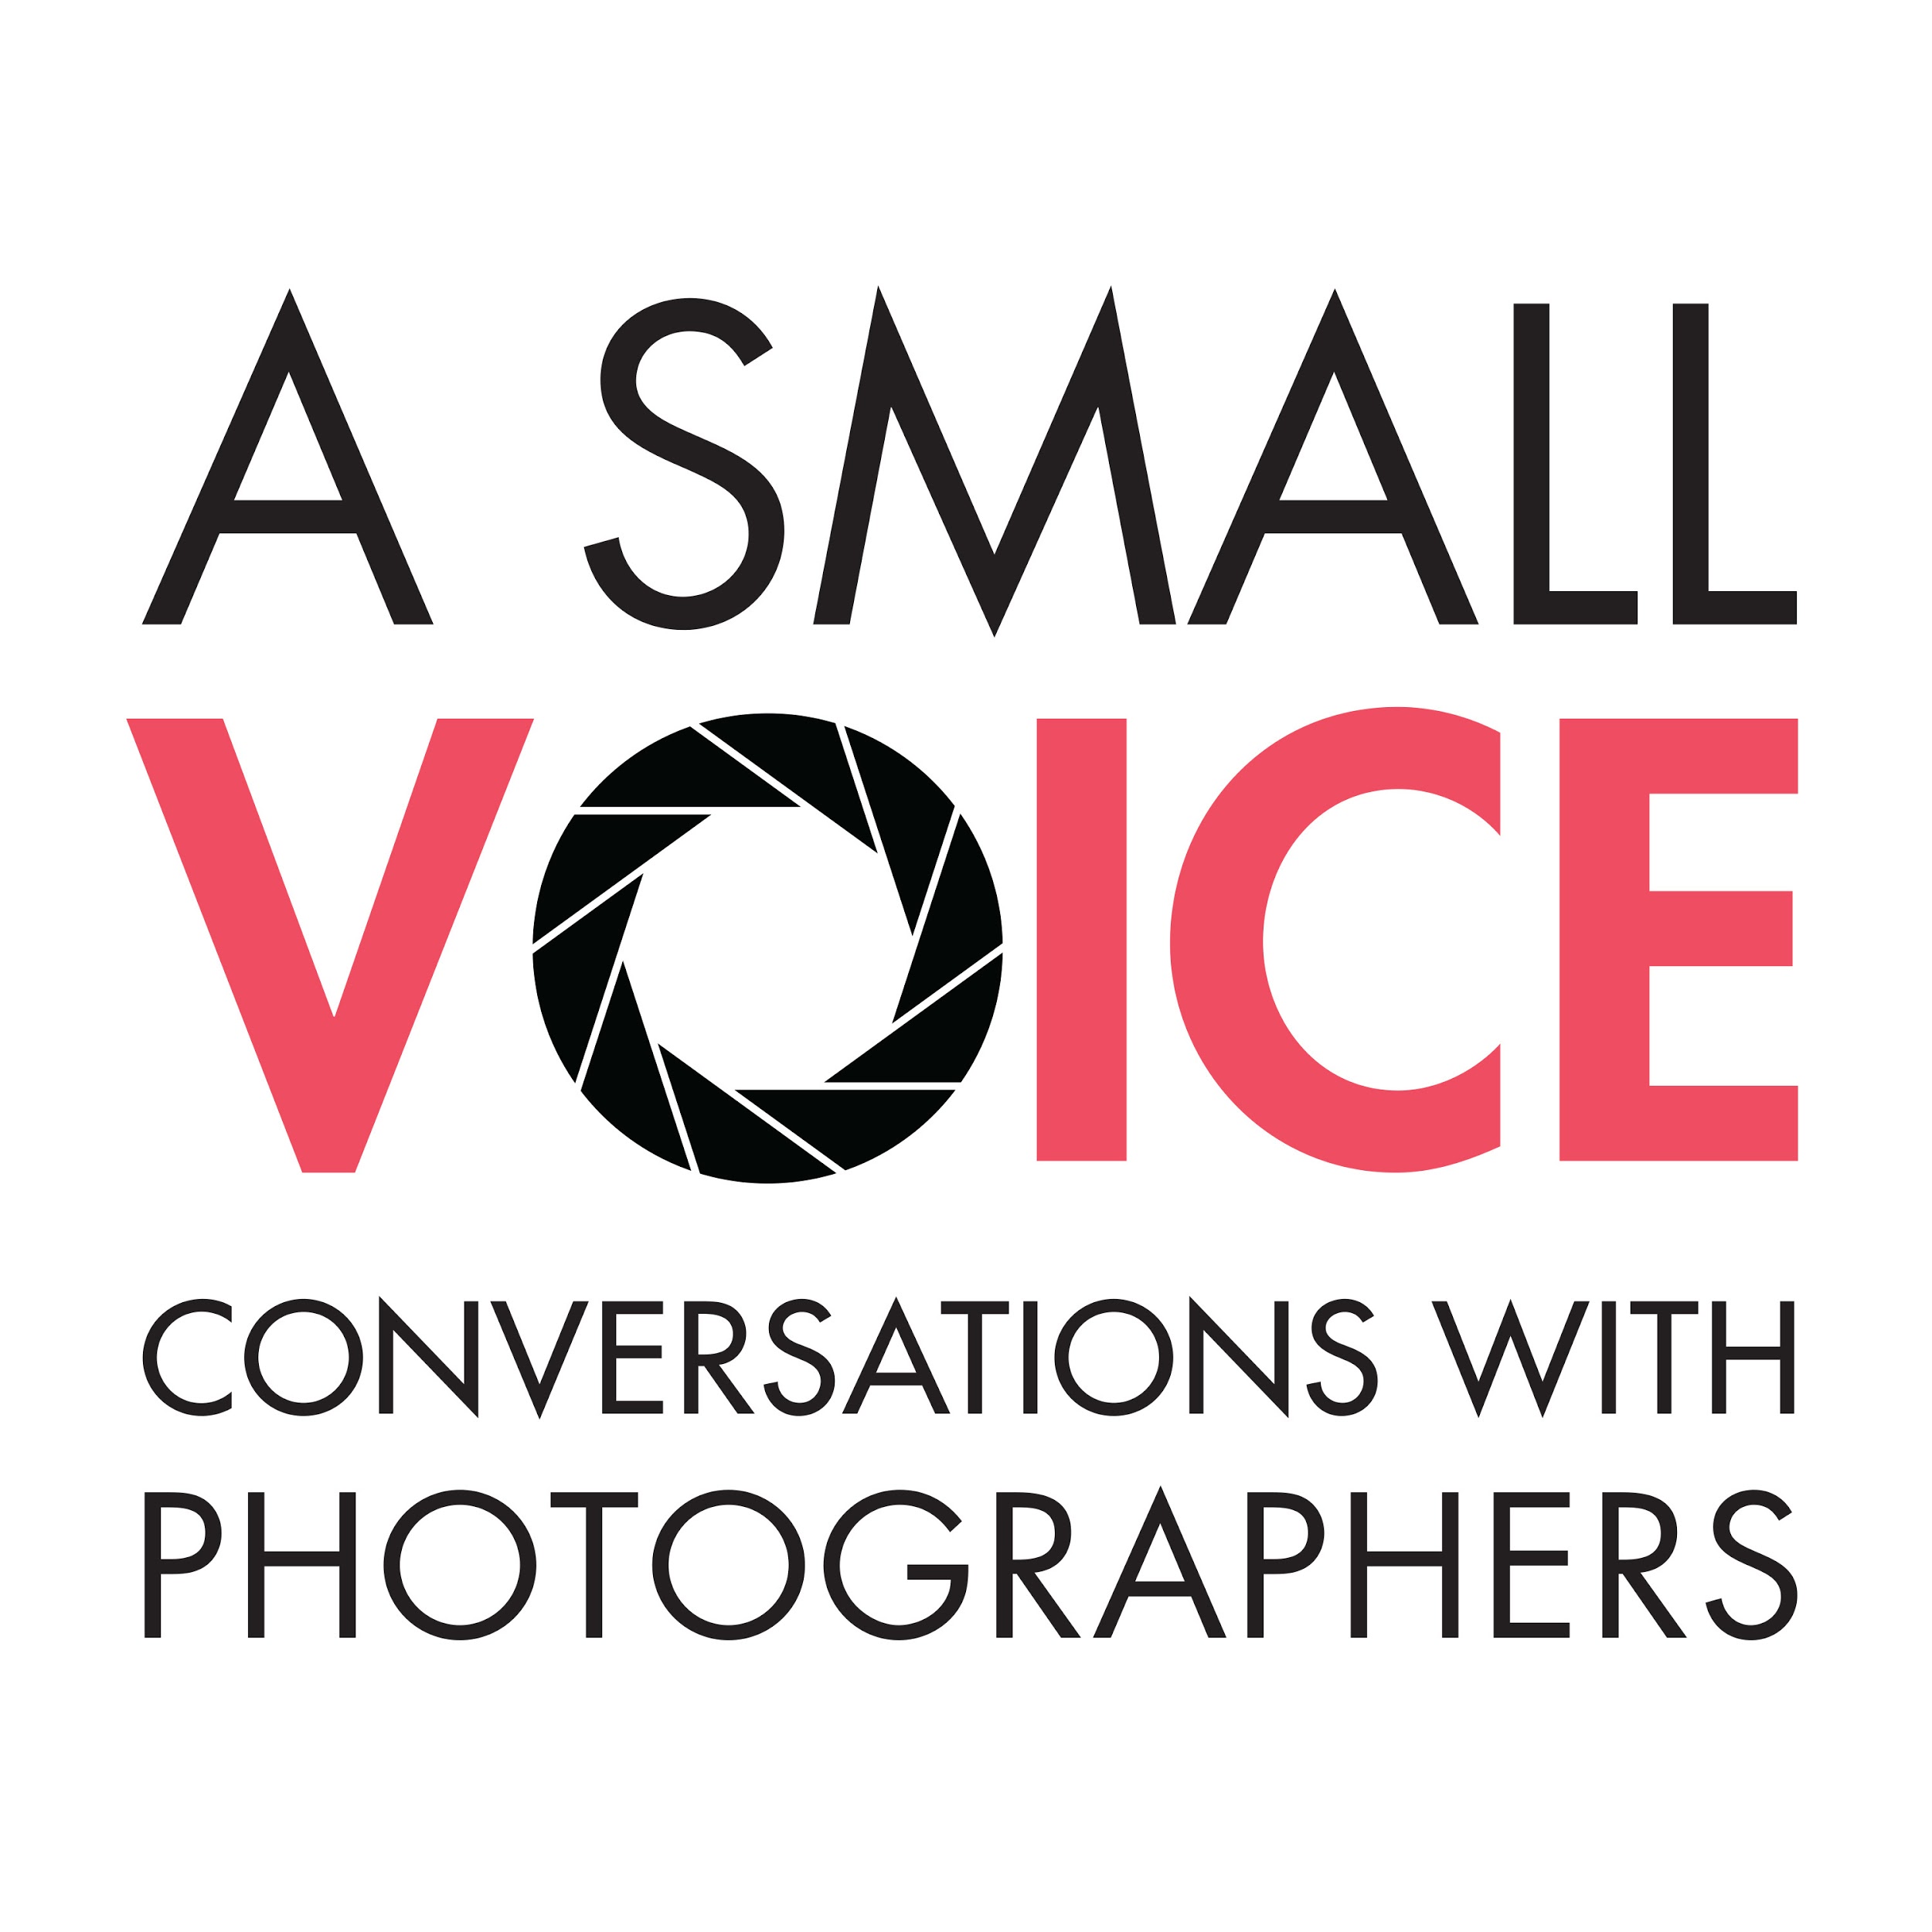 A small voice photography podcast logo